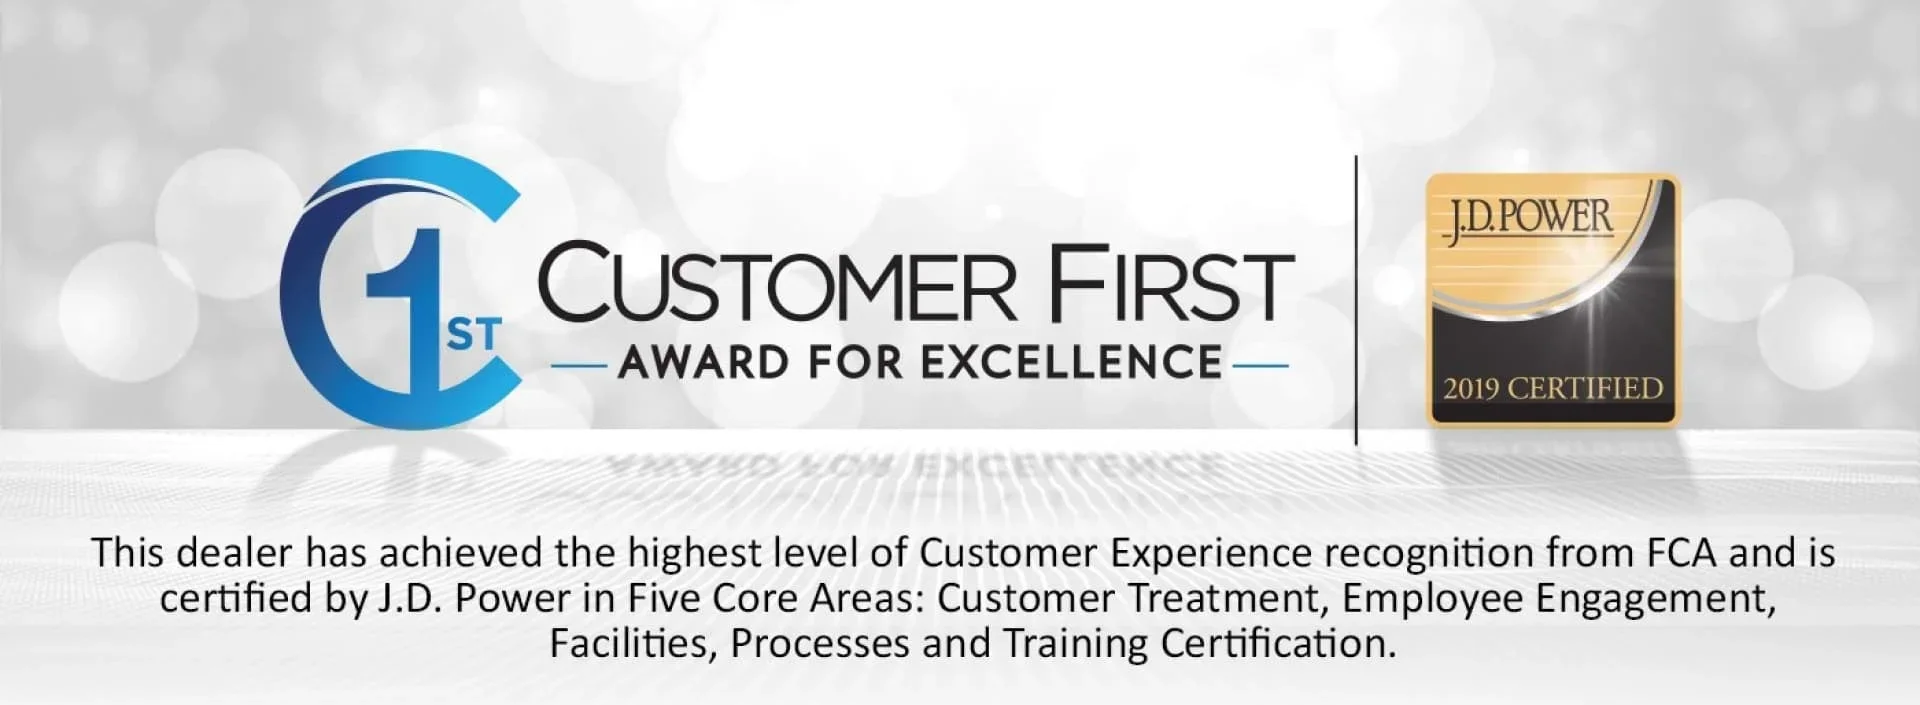 Customer 1st Award for Excellence